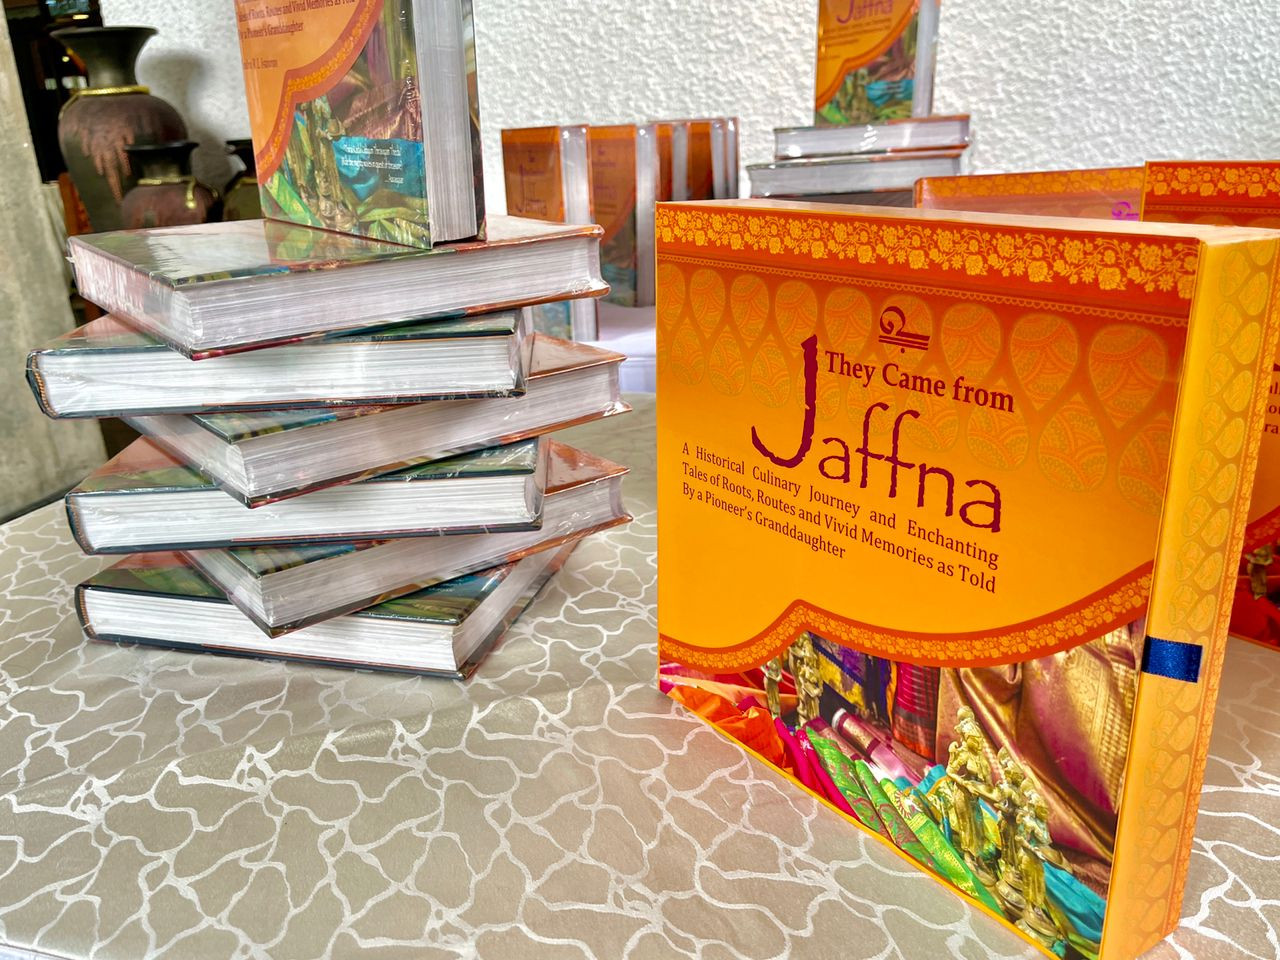 Copies of They Came From Jaffna. – KALASH NANDA KUMAR/The Vibes pic